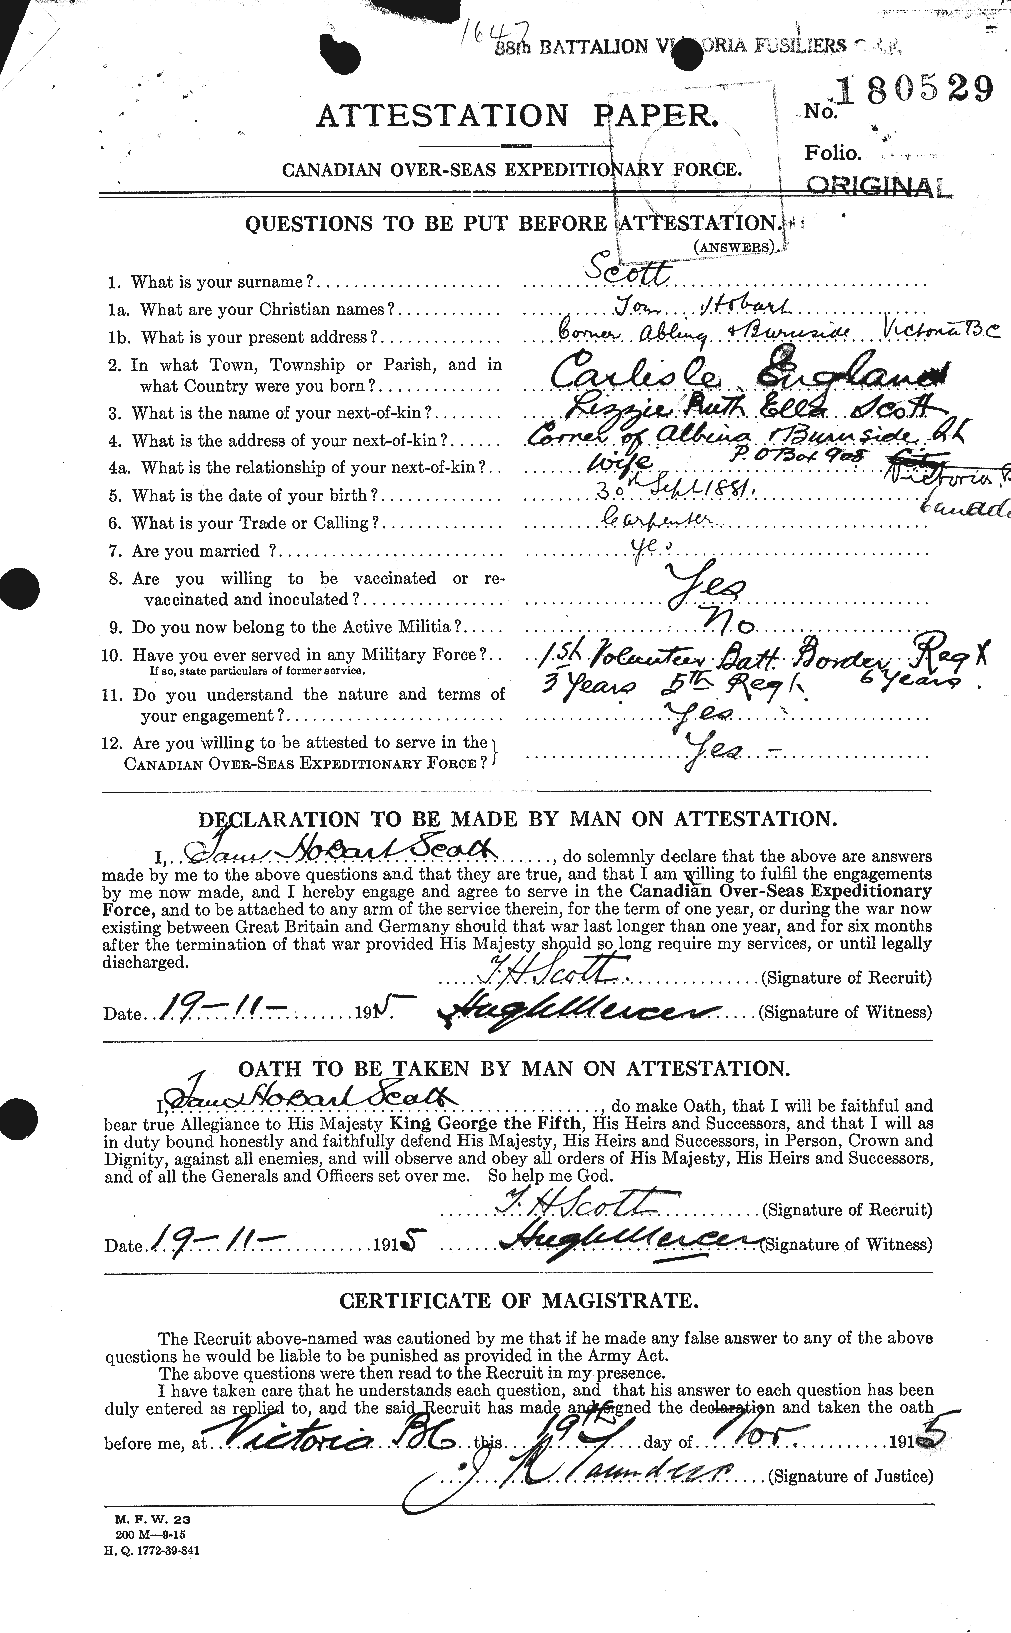 Personnel Records of the First World War - CEF 088208a